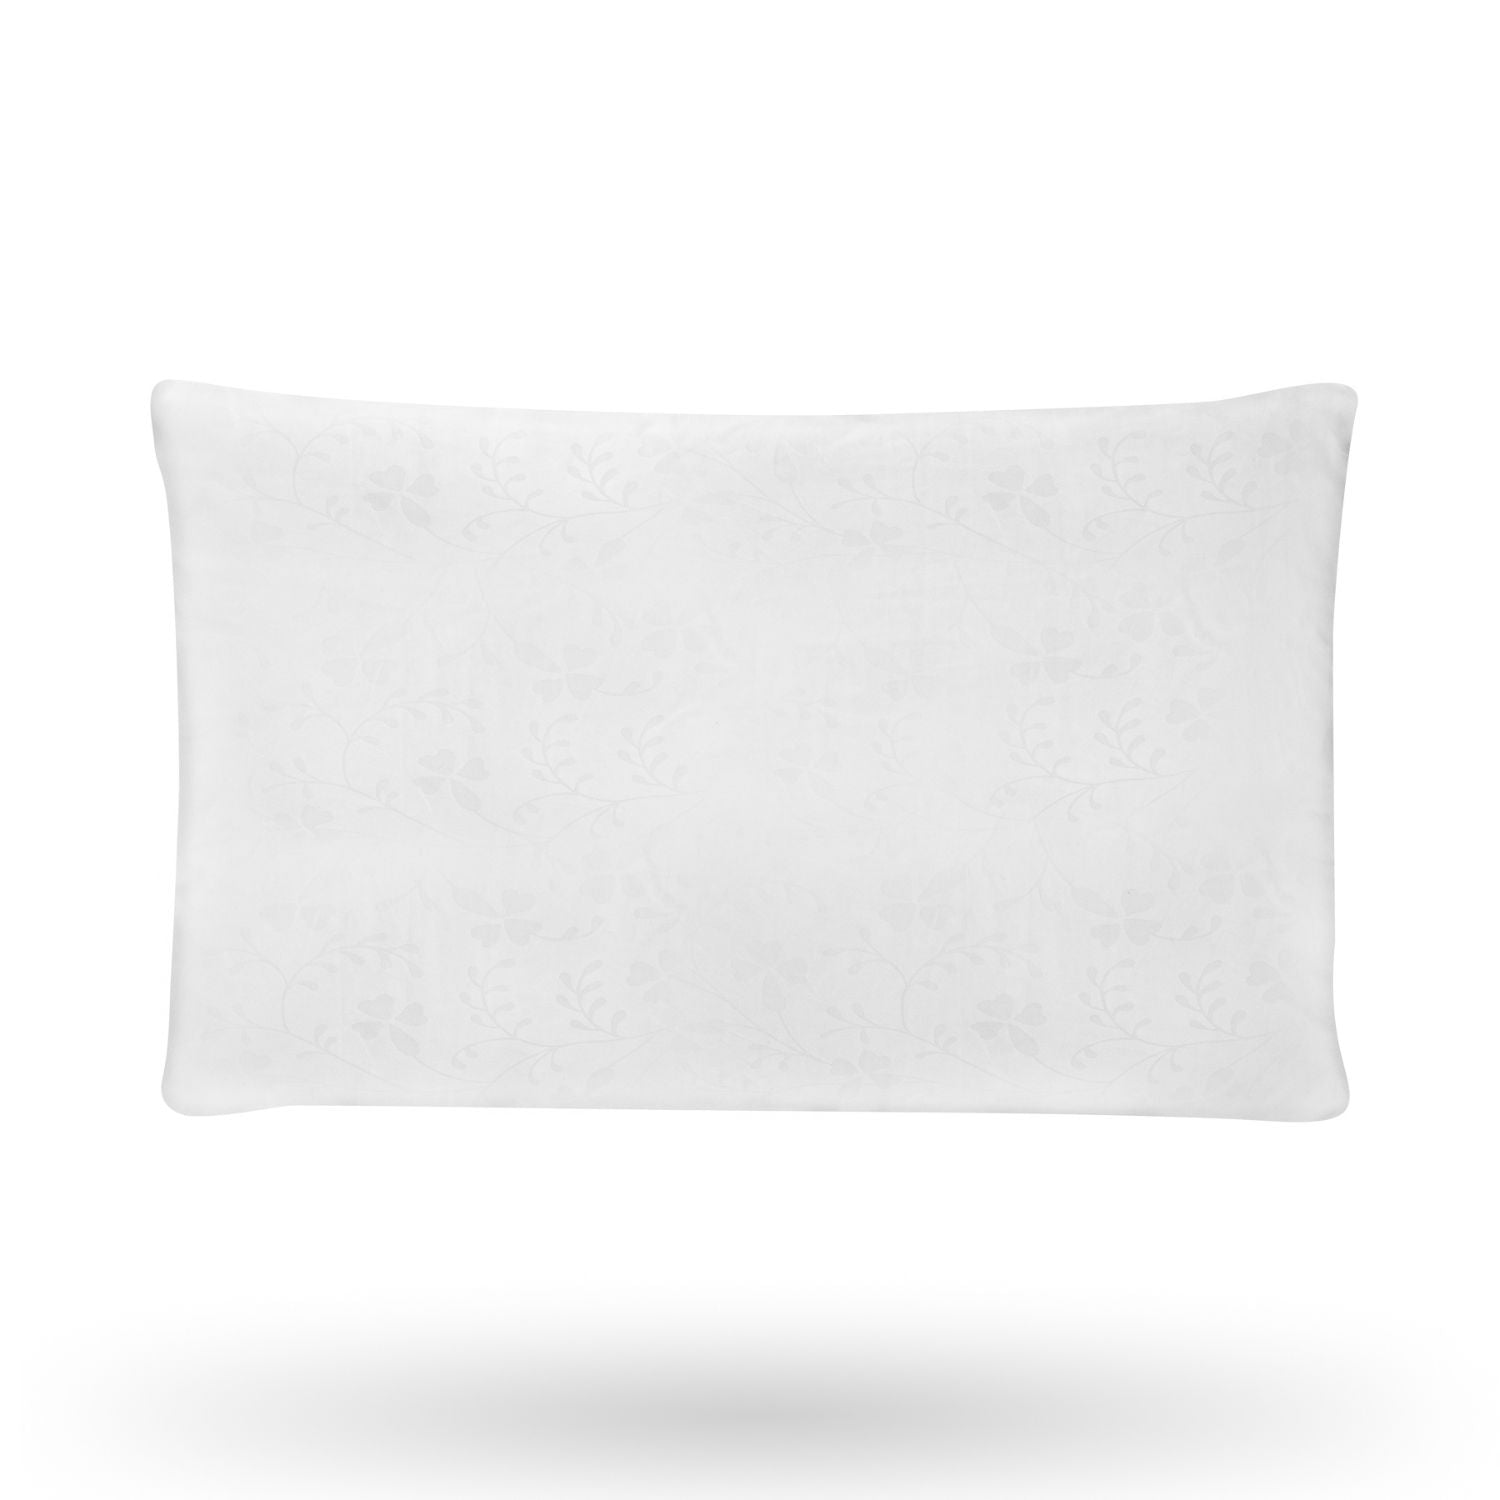 The Laura Ashley Goose Feather & Down Pillow in its Jacquard cotton cover 